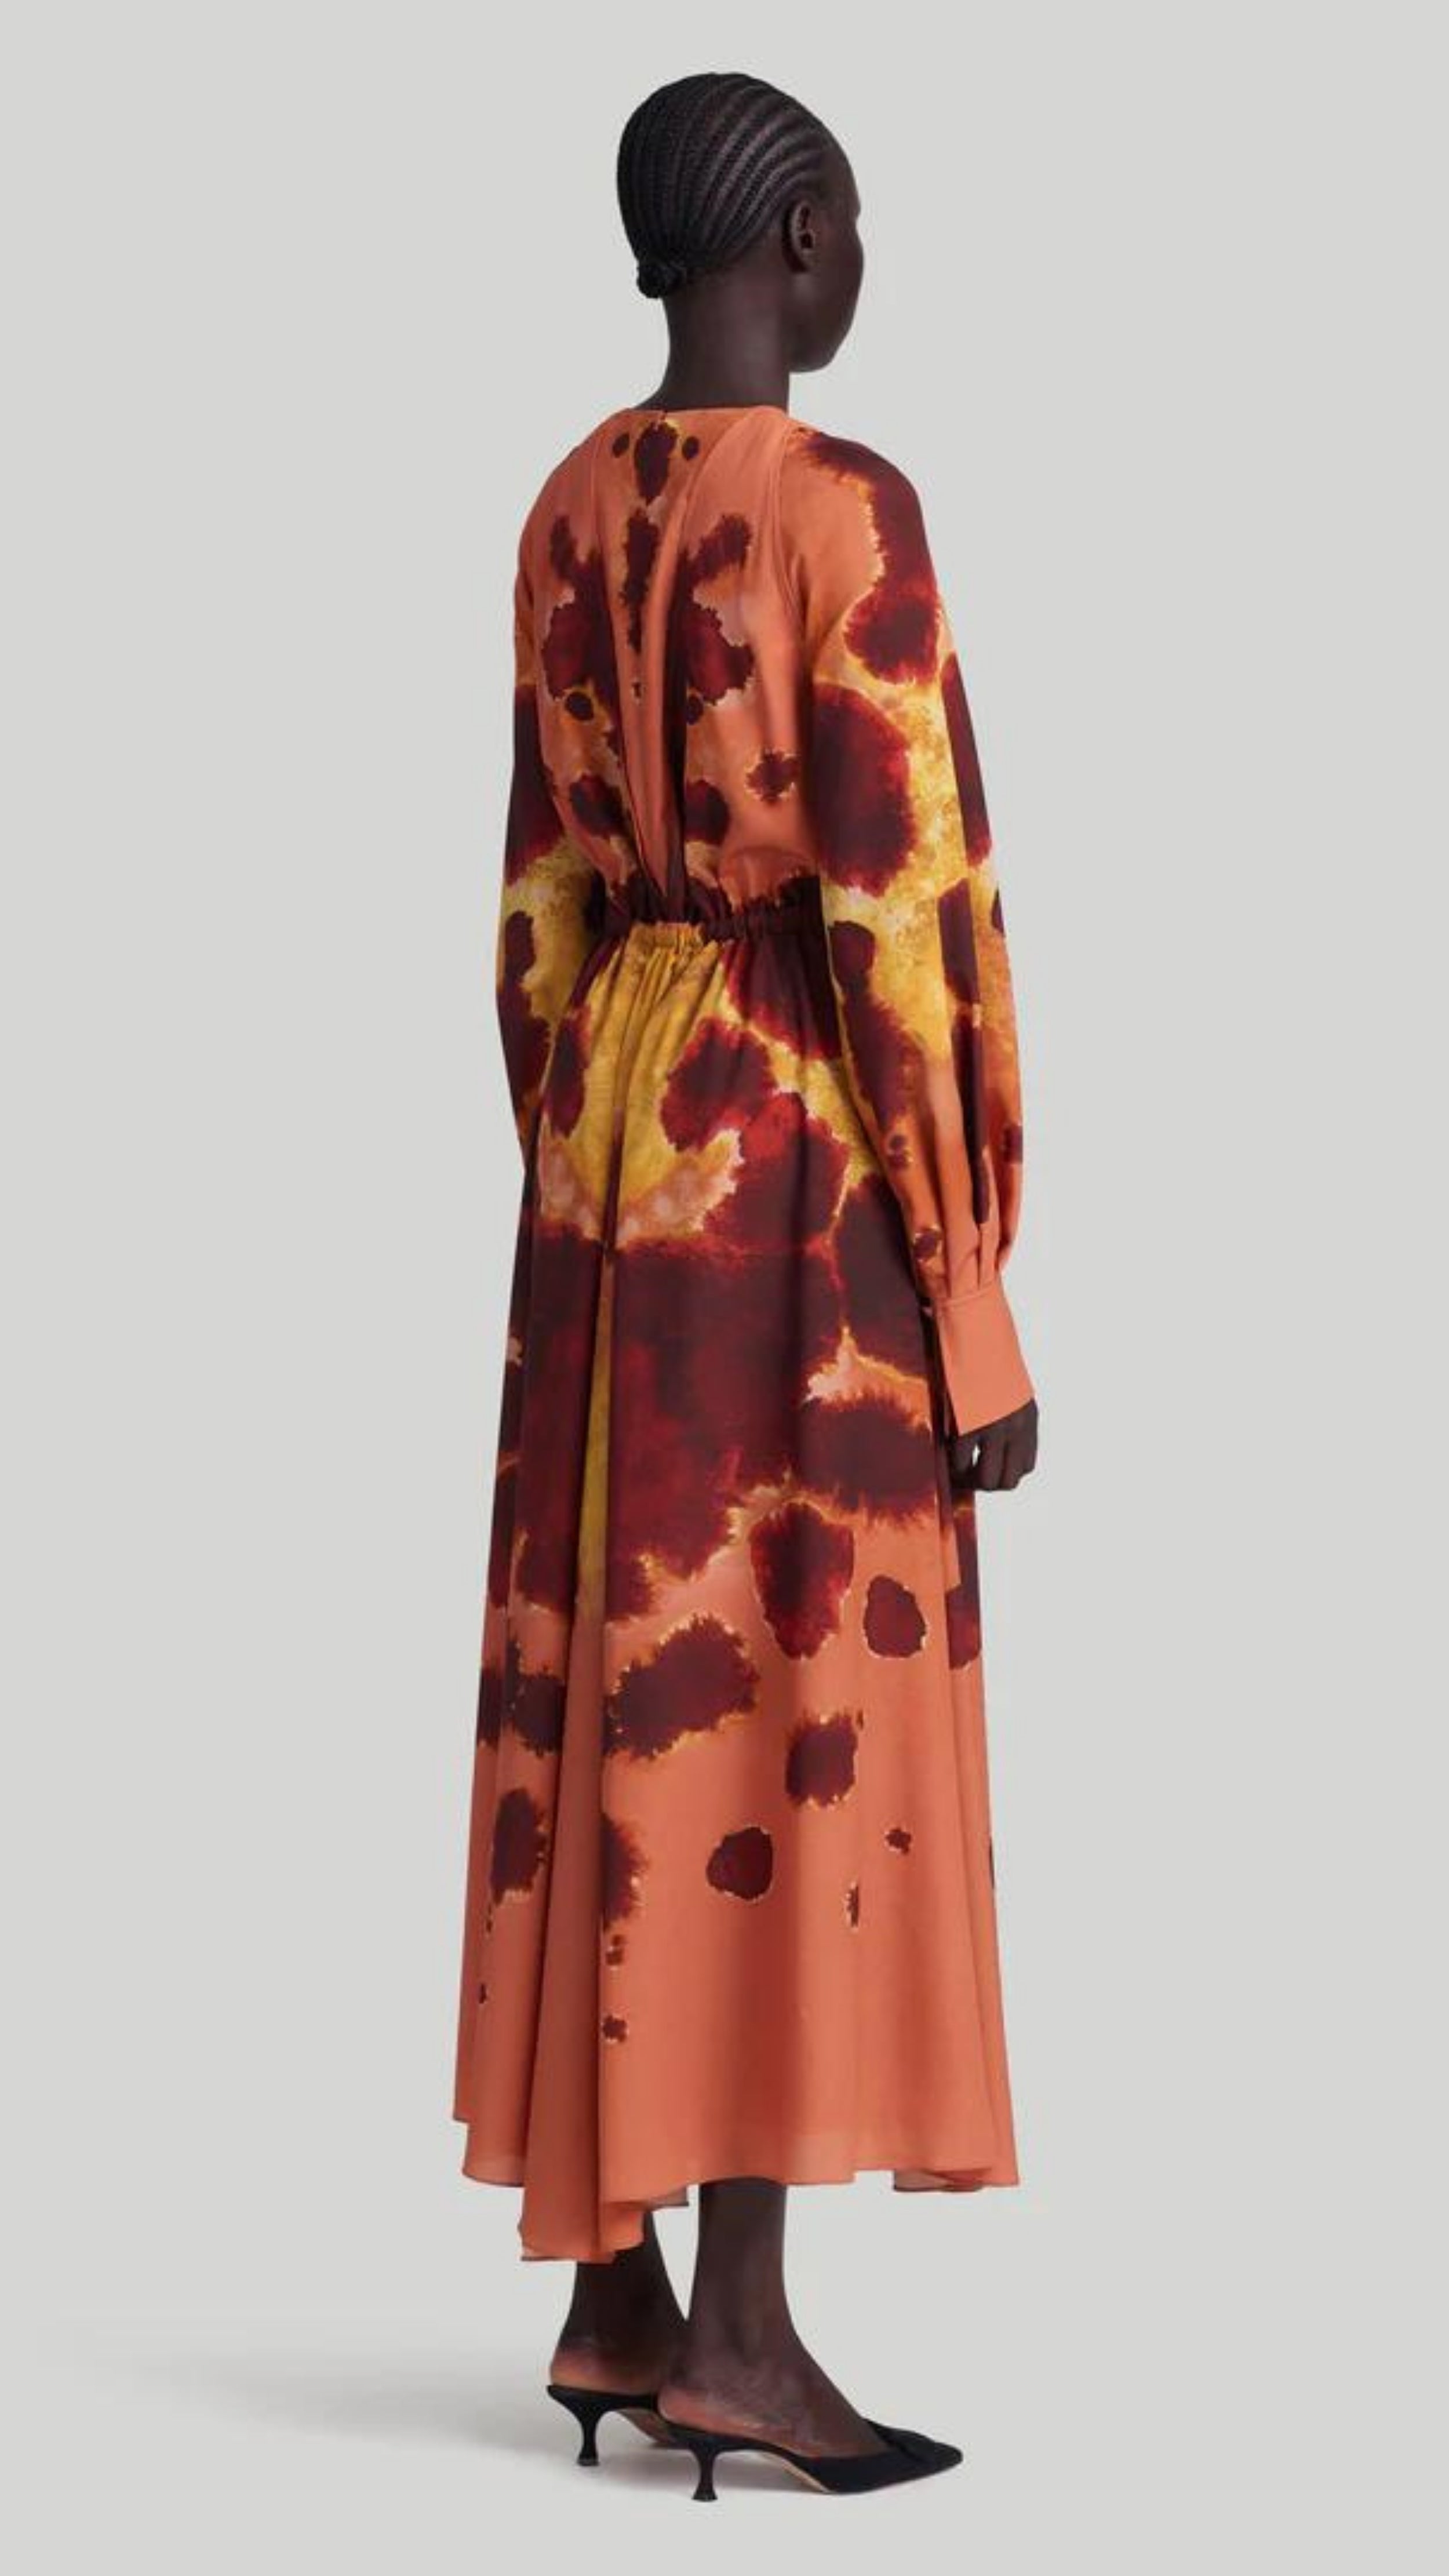 Altuzarra Peirene Dress. The Peirene midi dress has a relaxed silhouette with a tie at the waist. The keyhole neck can be styled closed or open, creating a v-neck look. Made in beautiful peach, cranberry, and yellow dyed pattern. Shown on model facing side and back